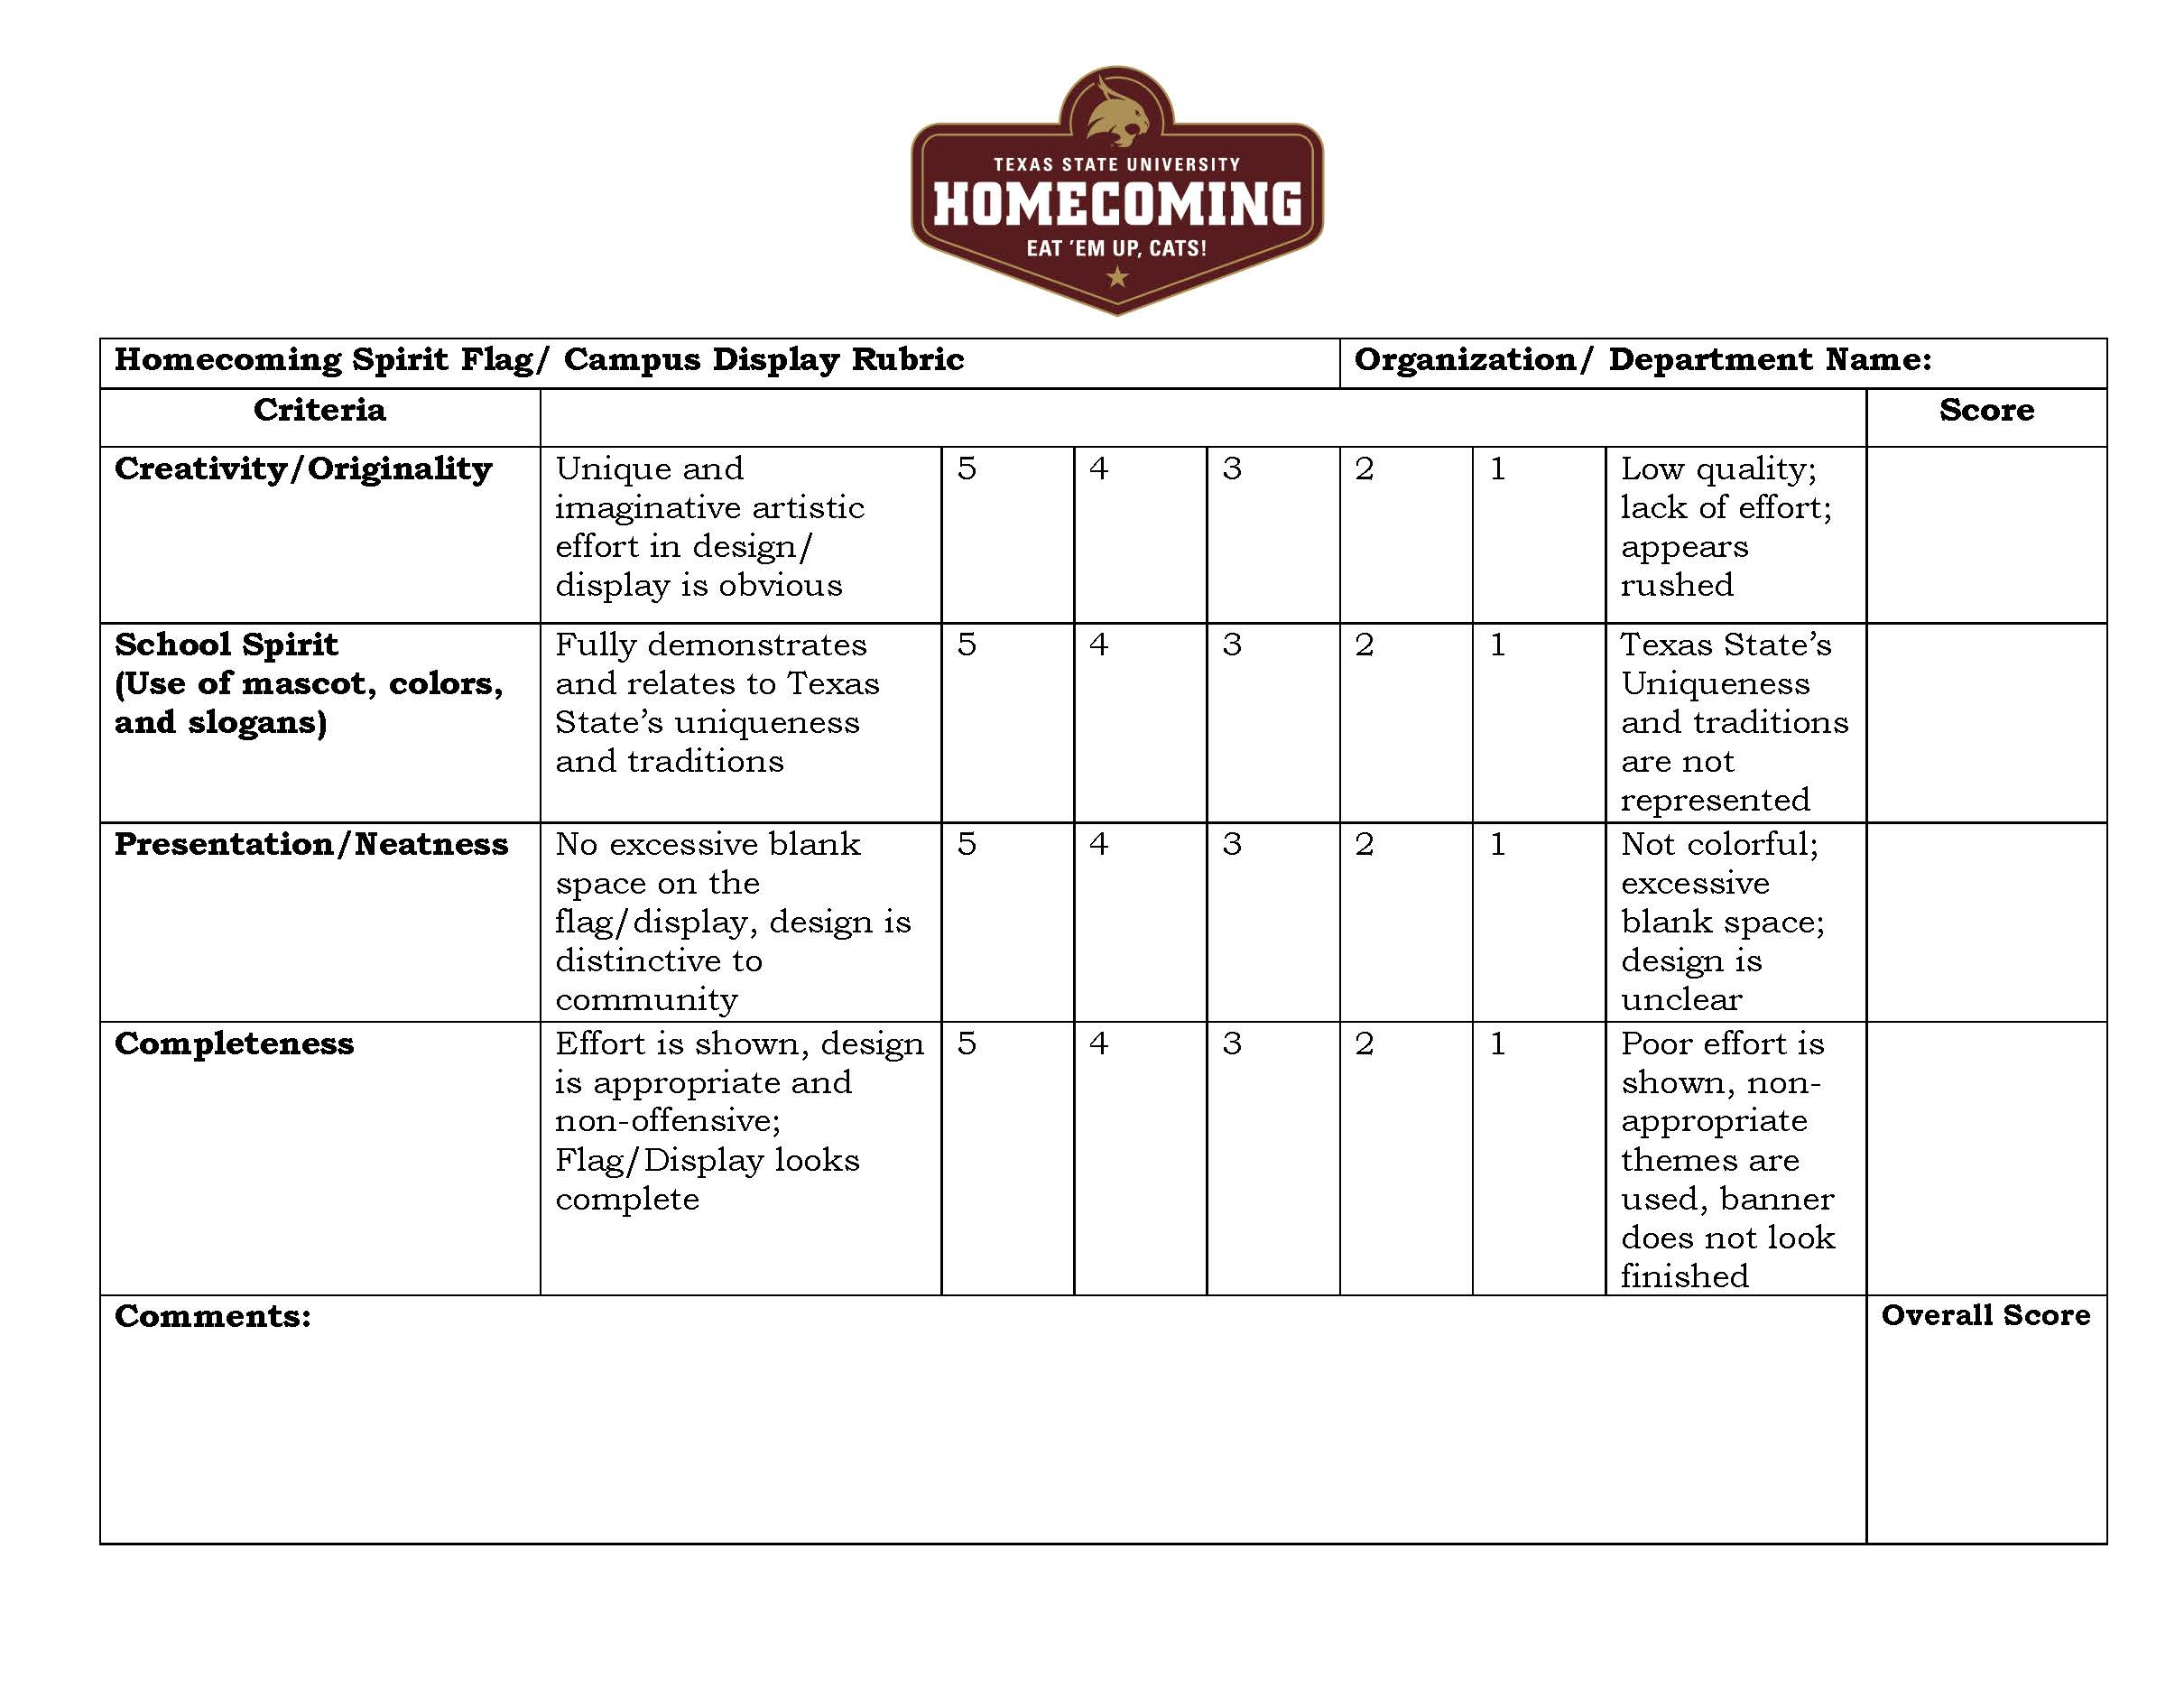 Rubric for campus display and spirit flag competition.